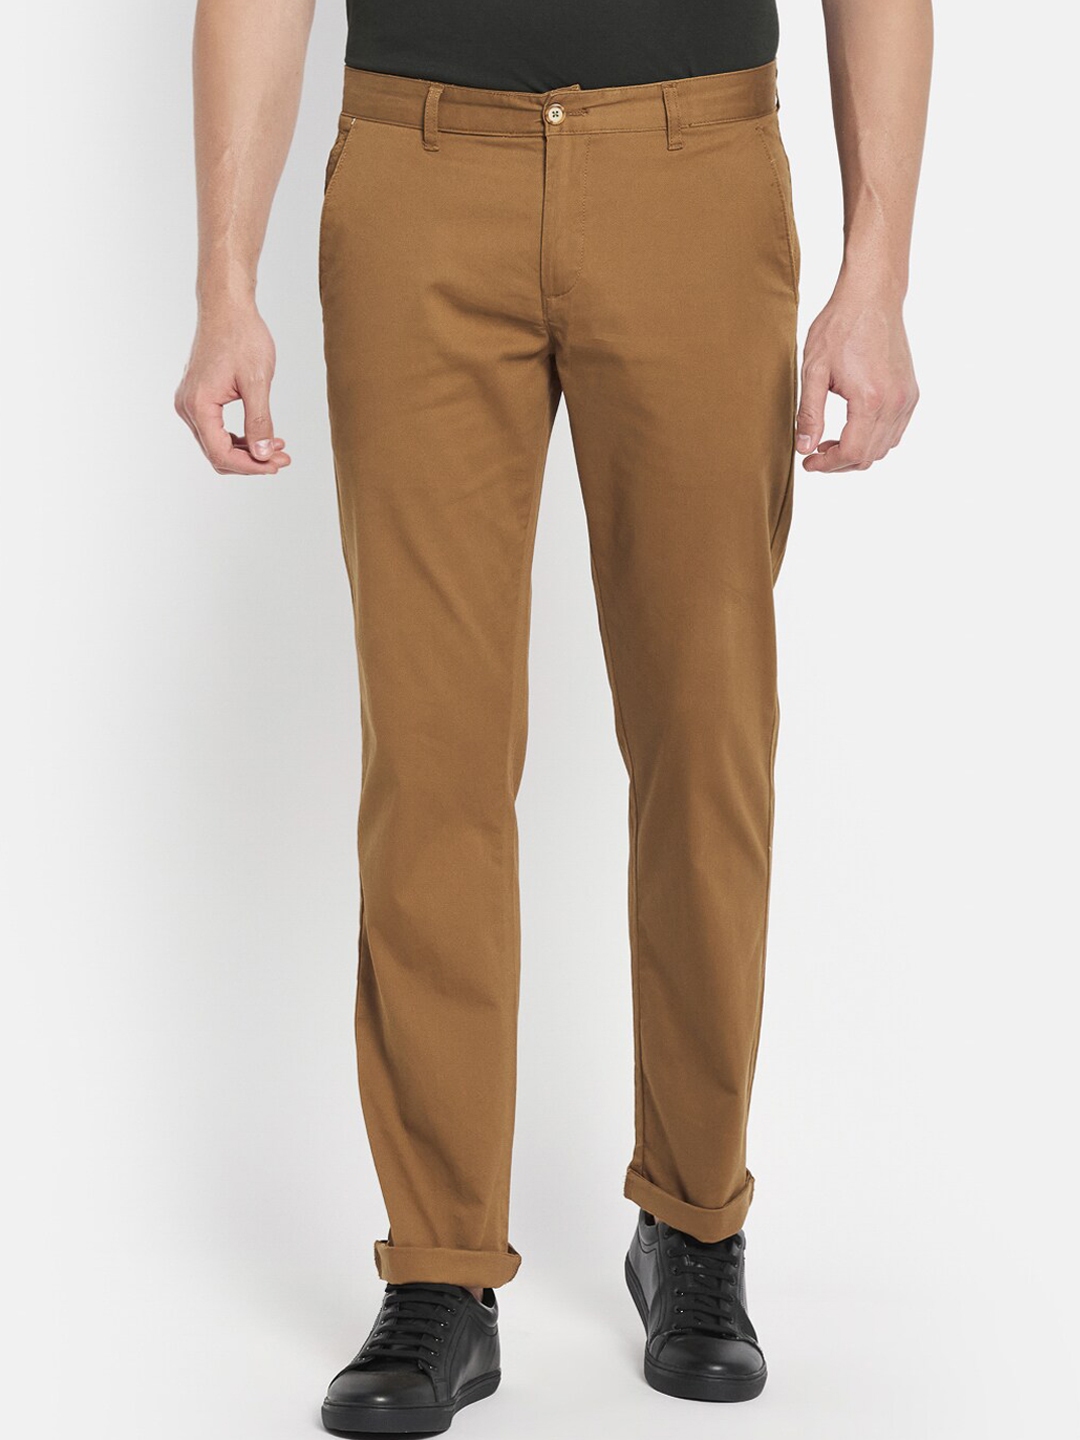 Buy Octave Men Brown Chinos Trousers - Trousers for Men 17586020 | Myntra